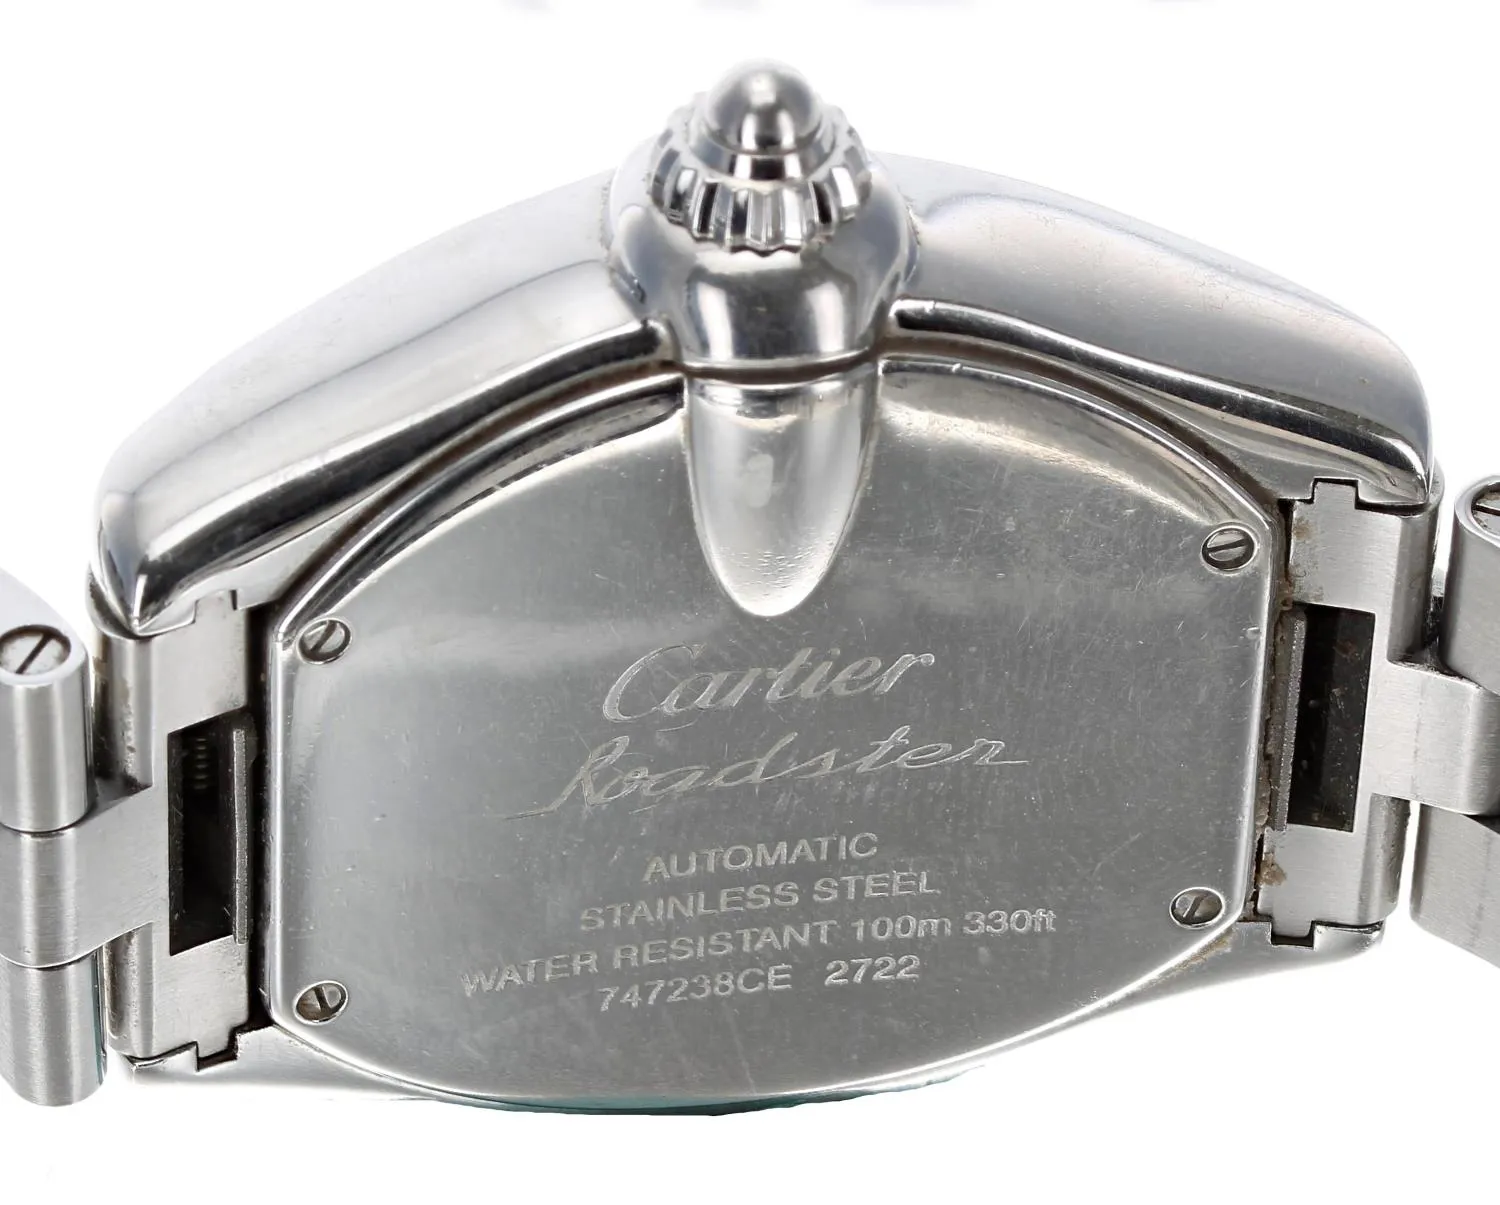 Cartier Roadster 2722 40mm Stainless steel Silver 4